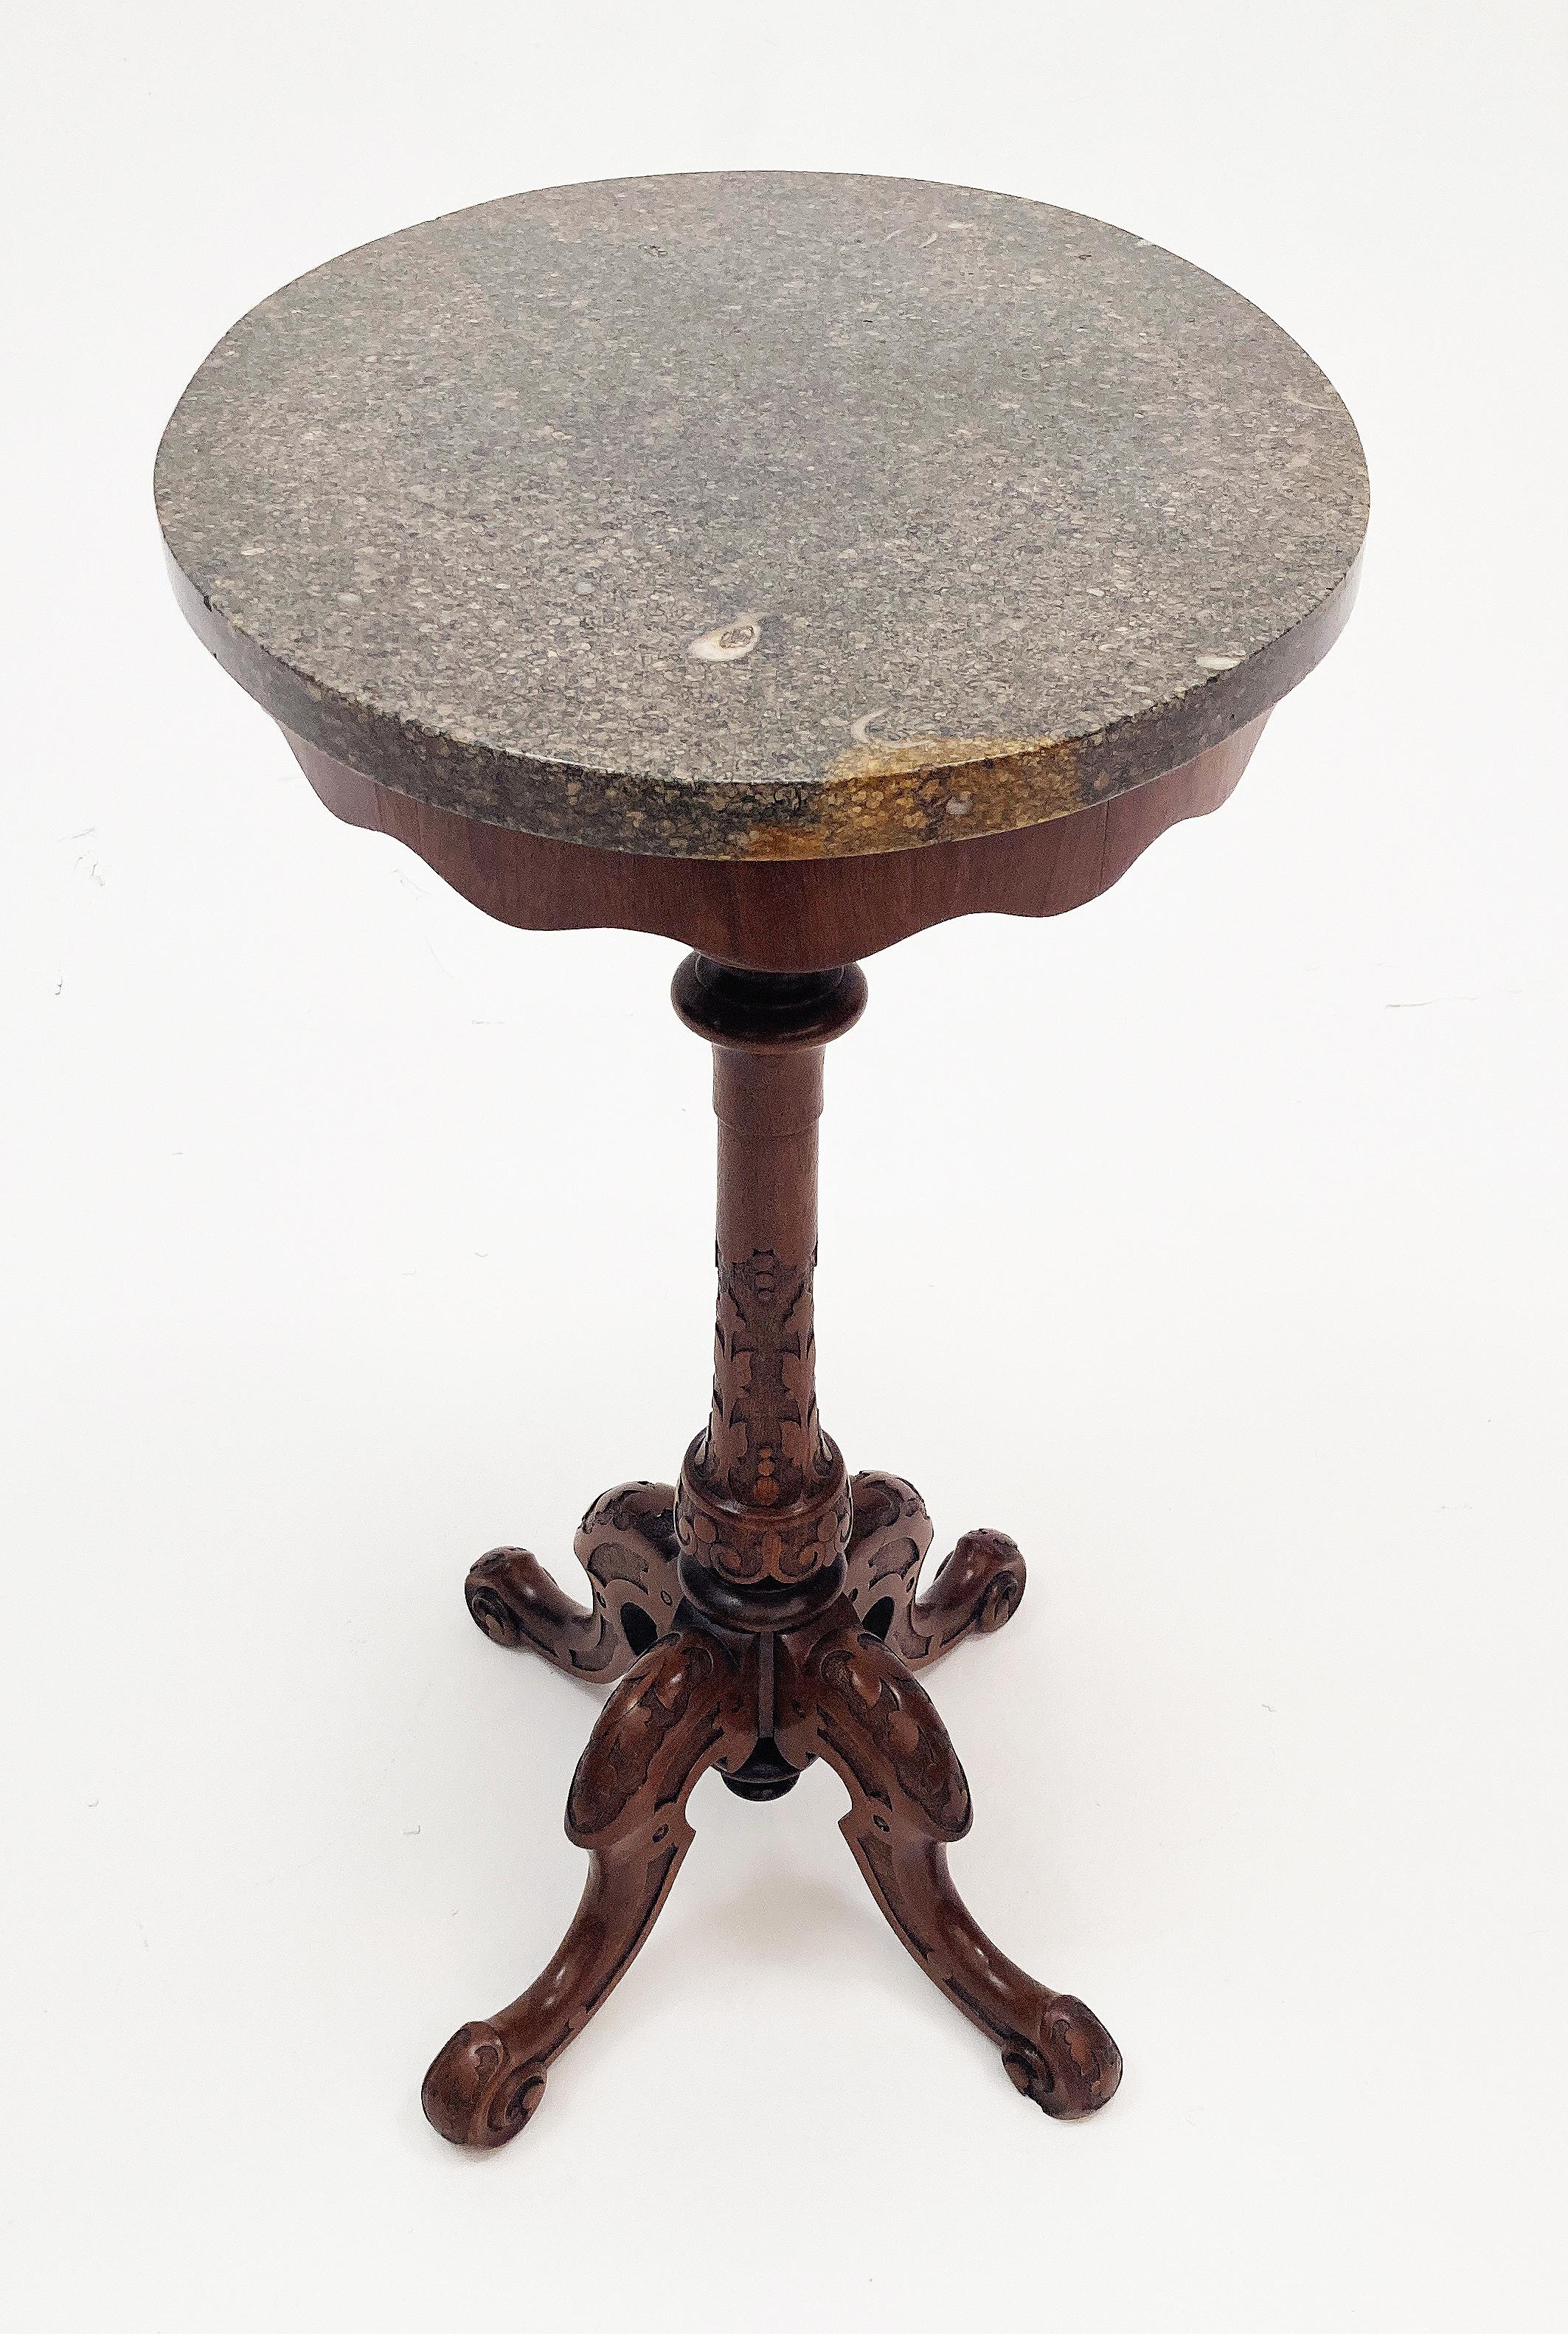 19th c. Victorian Walnut Carved Chippendale Style Gueridon Marble Top Table For Sale 2